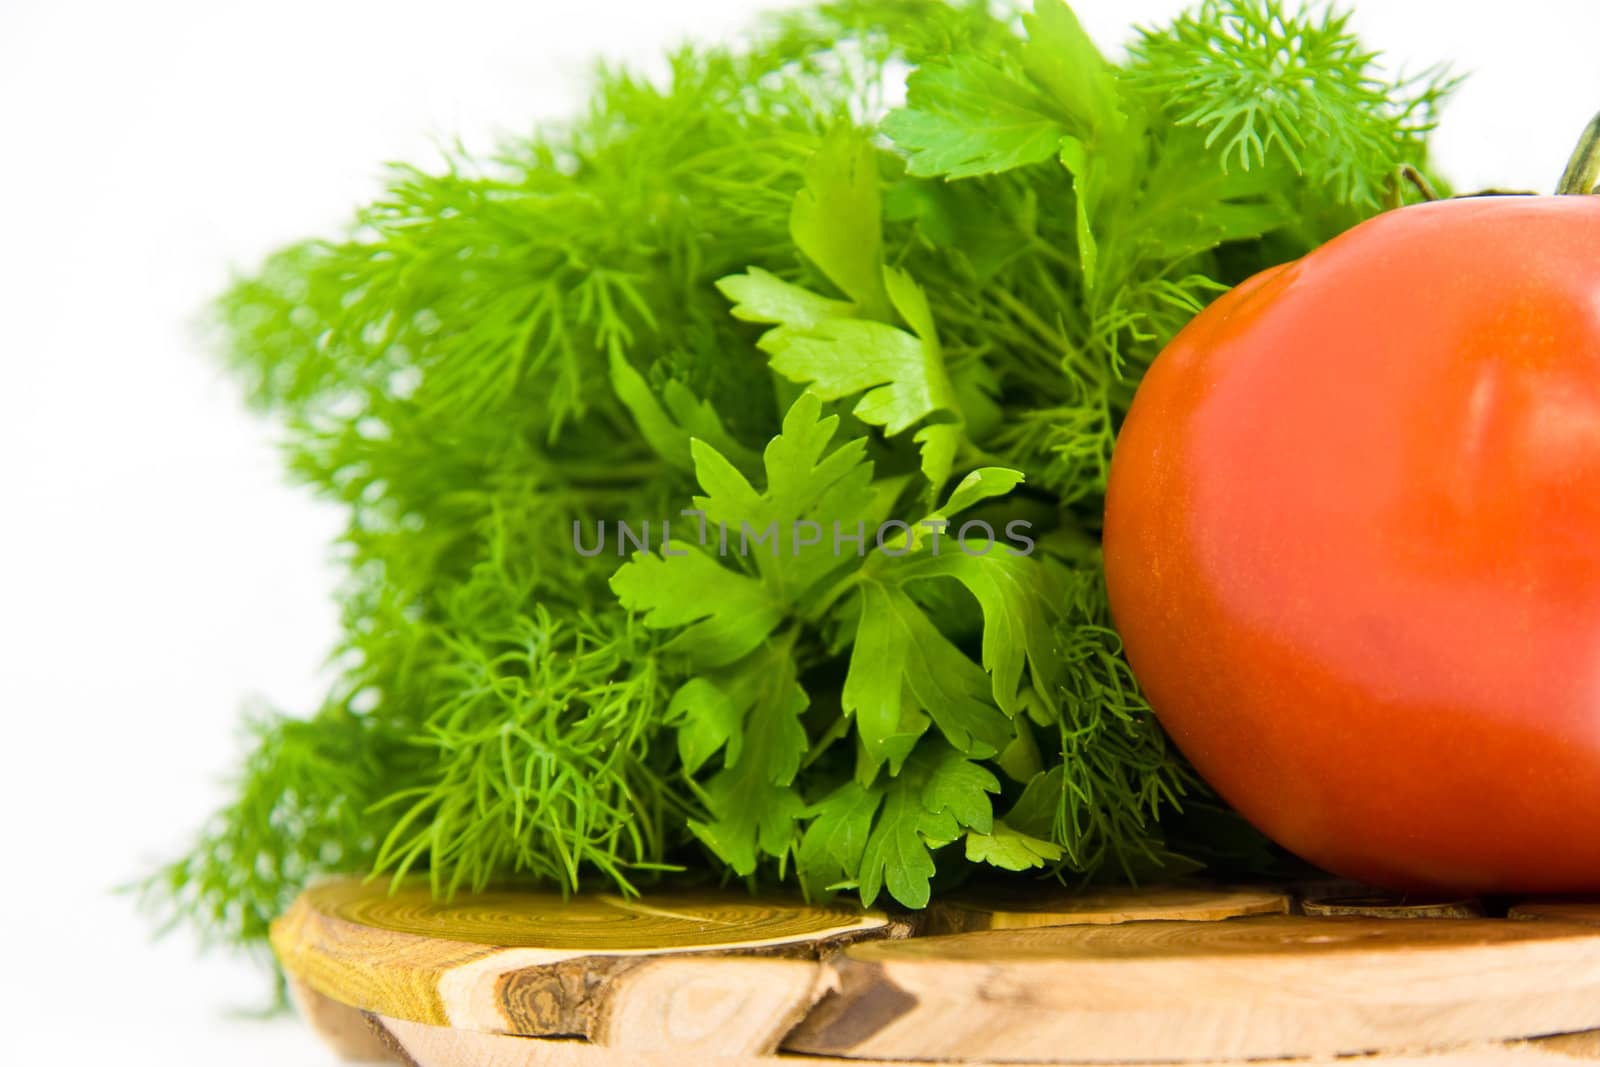 Succulent tomato with parsley for salad